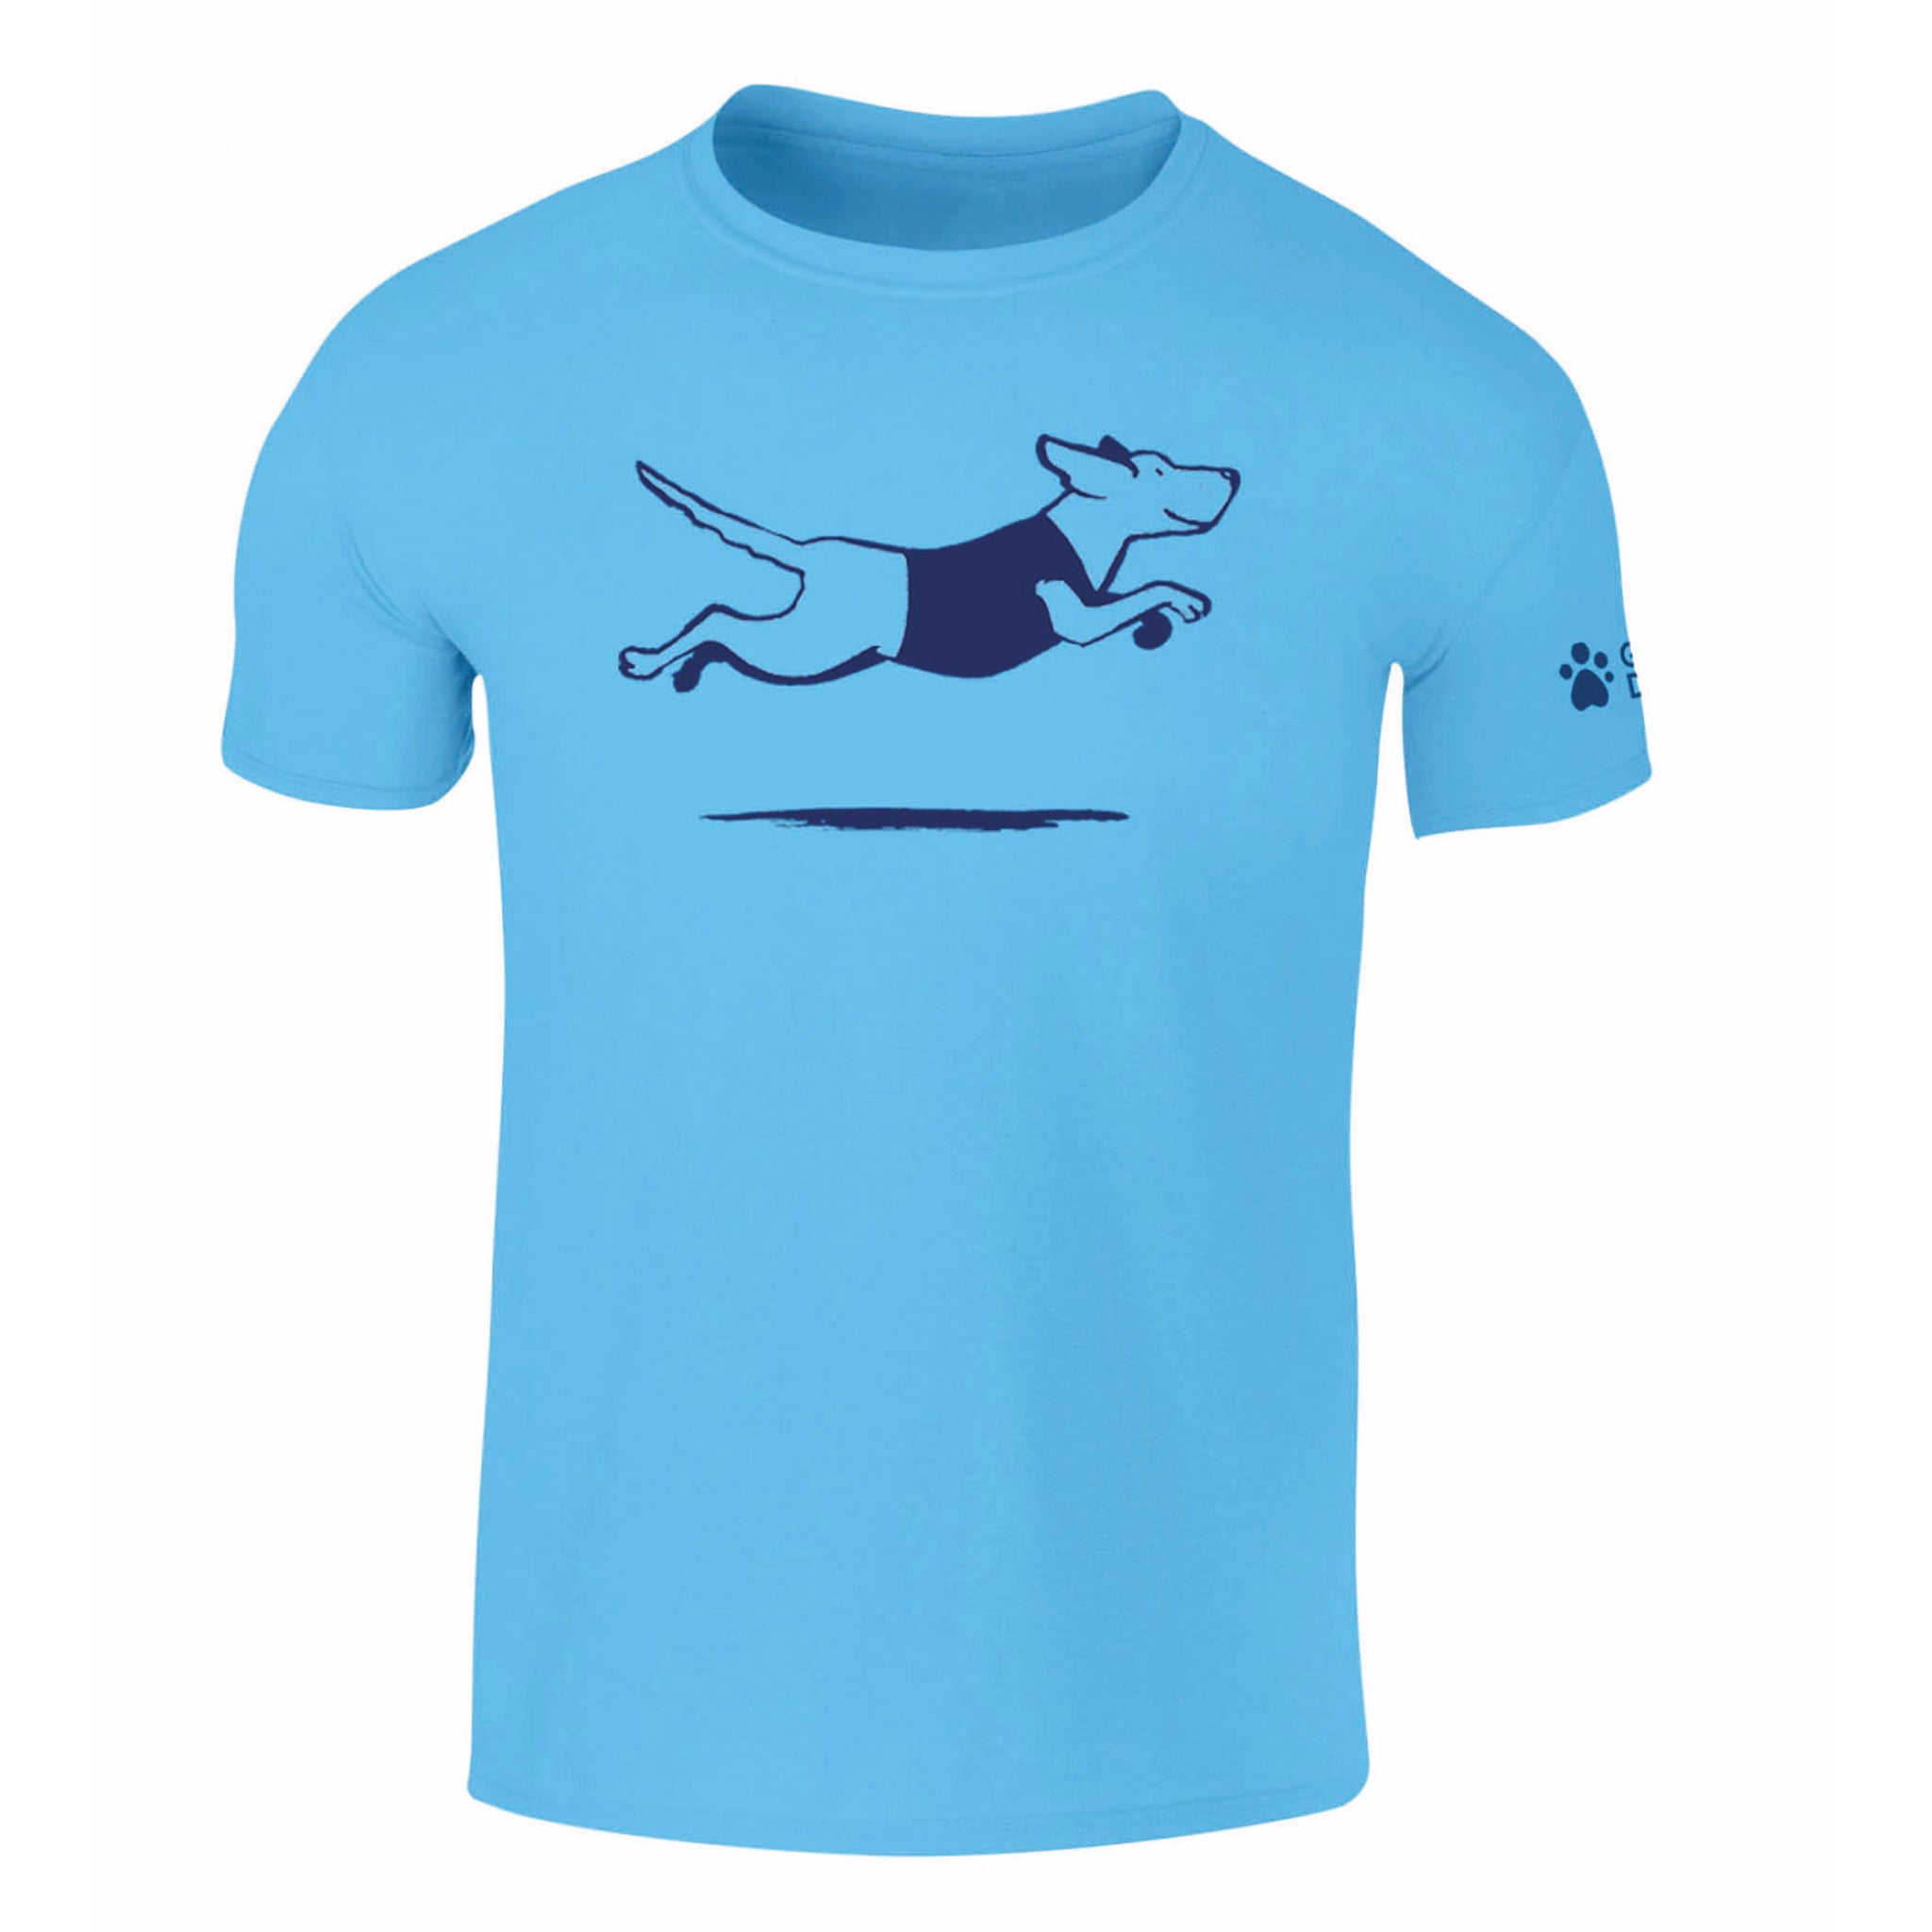 A close up of the front of a blue men's t-shirt, there is leaping Labrador design printed on the front in dark blue and the Guide Dogs logo is printed on the left sleeve.